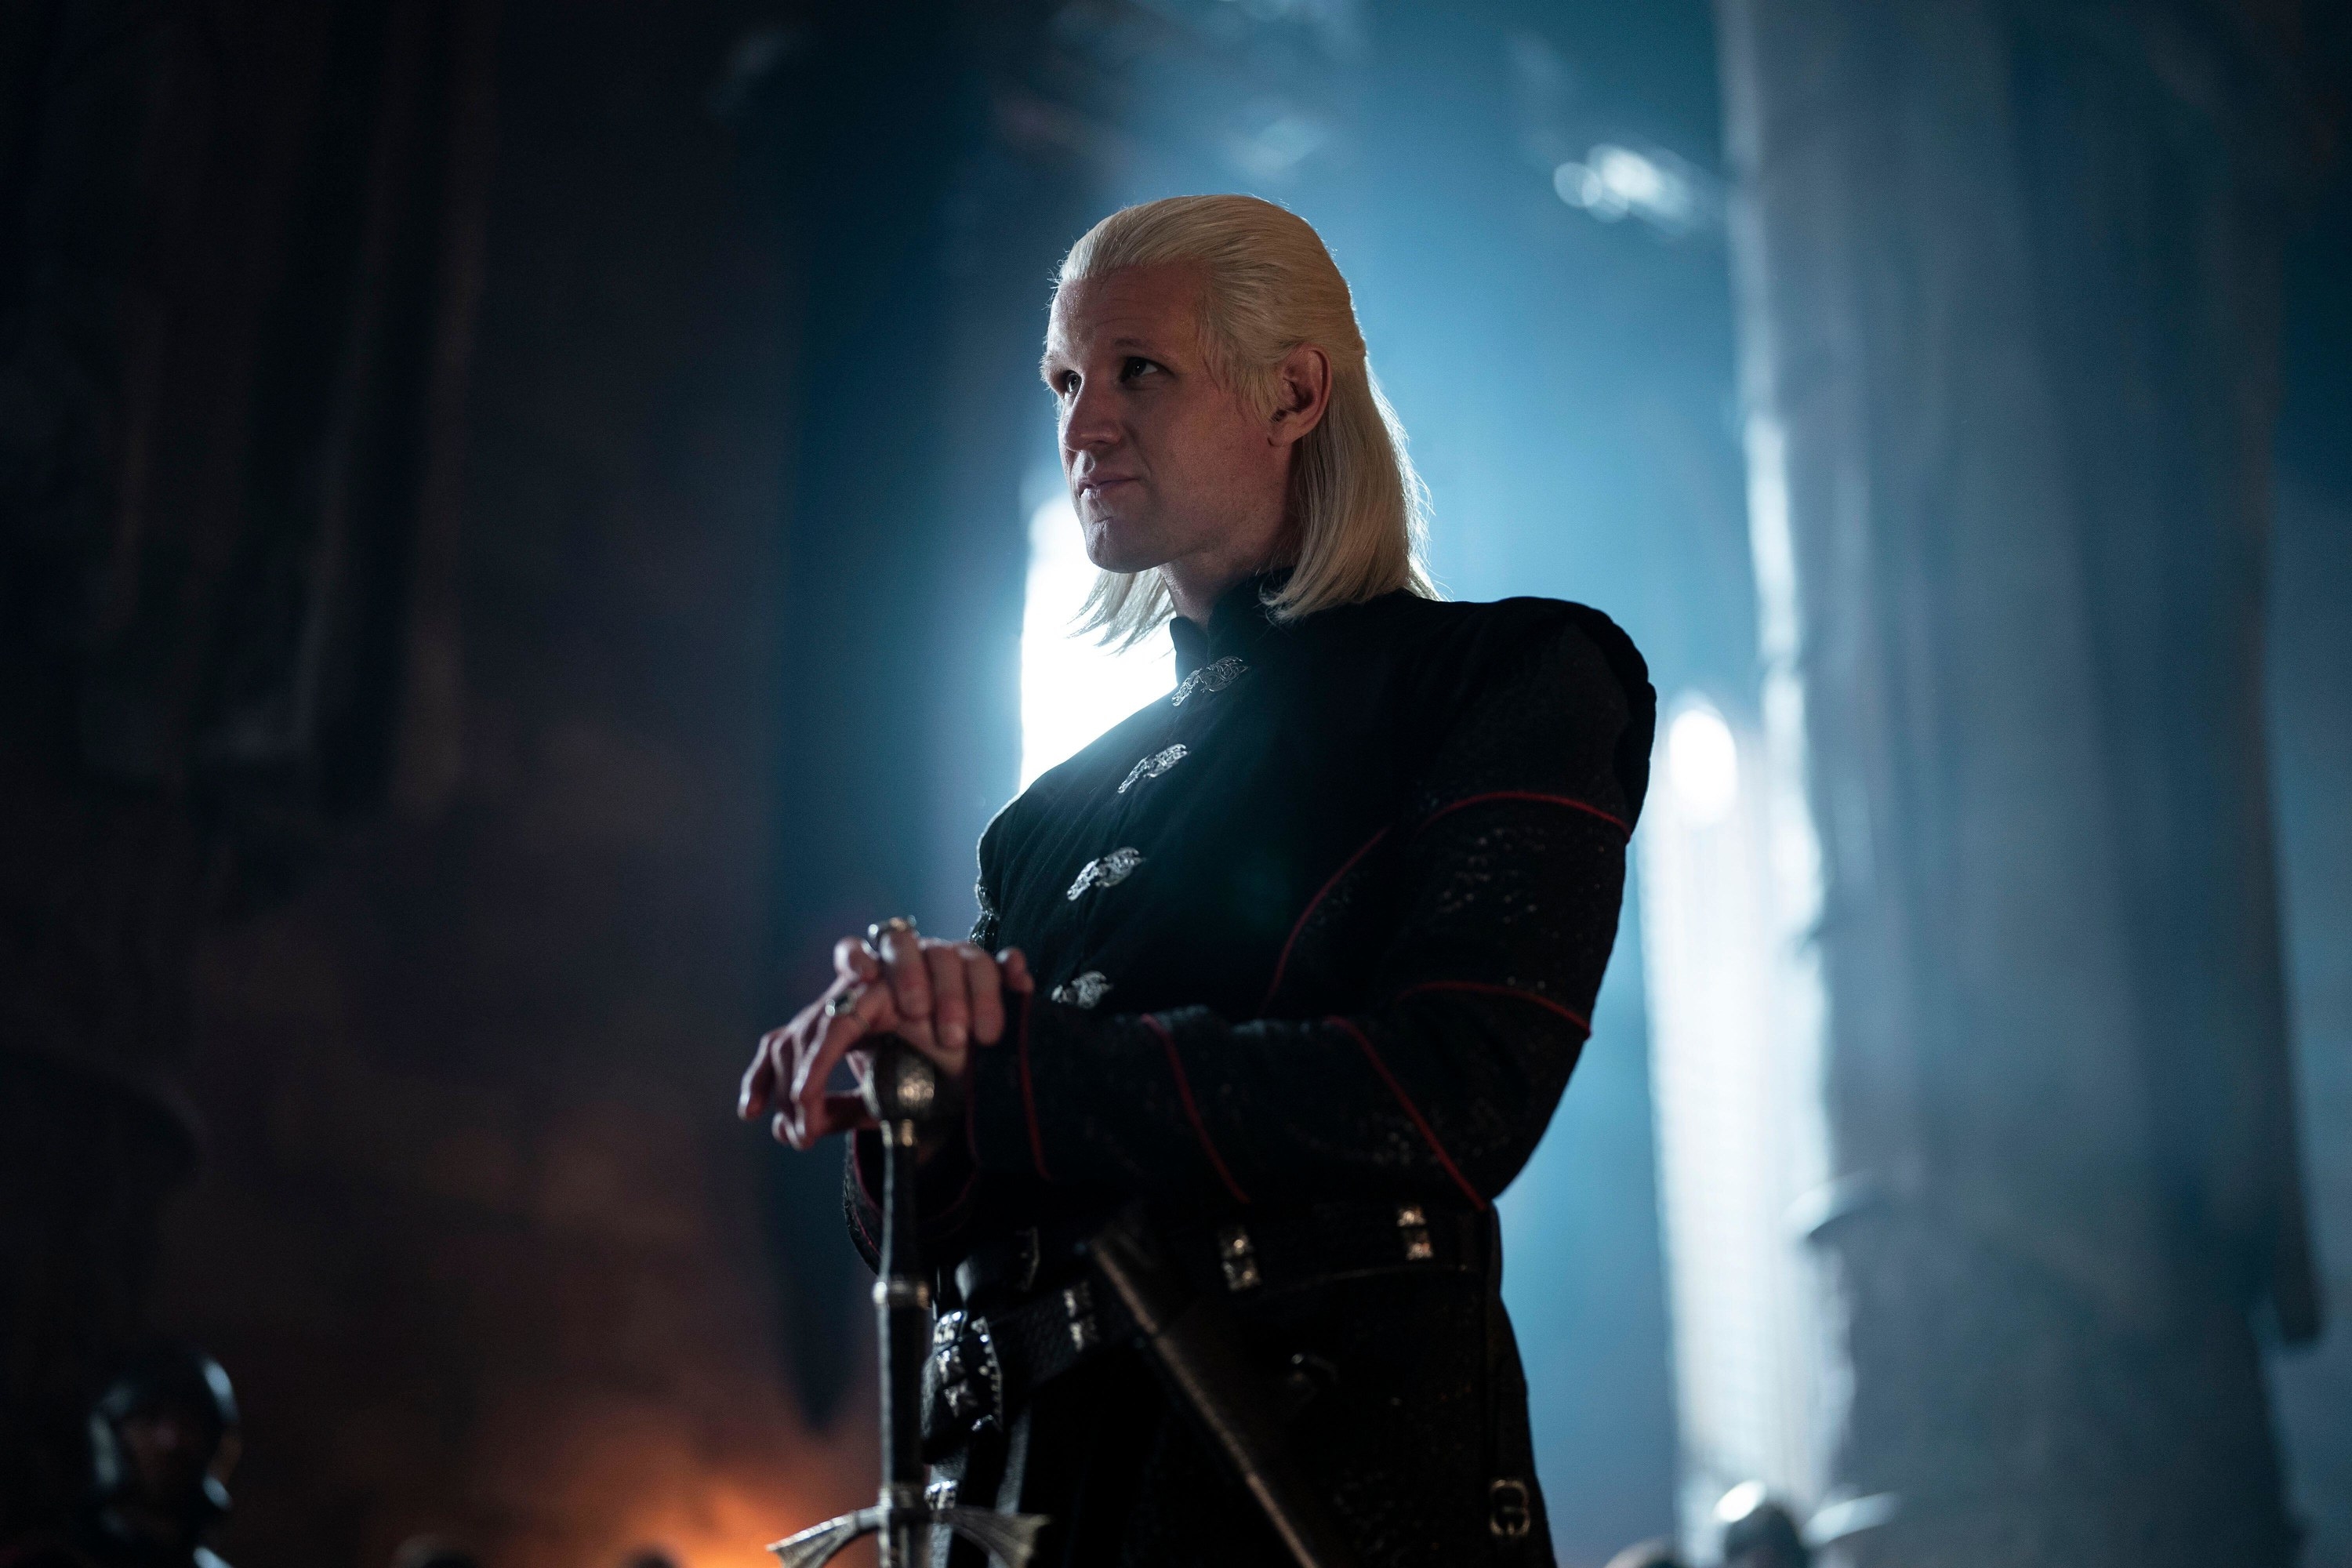 A blonde man stares disapprovingly in a great hall while placing his hands above his sword.